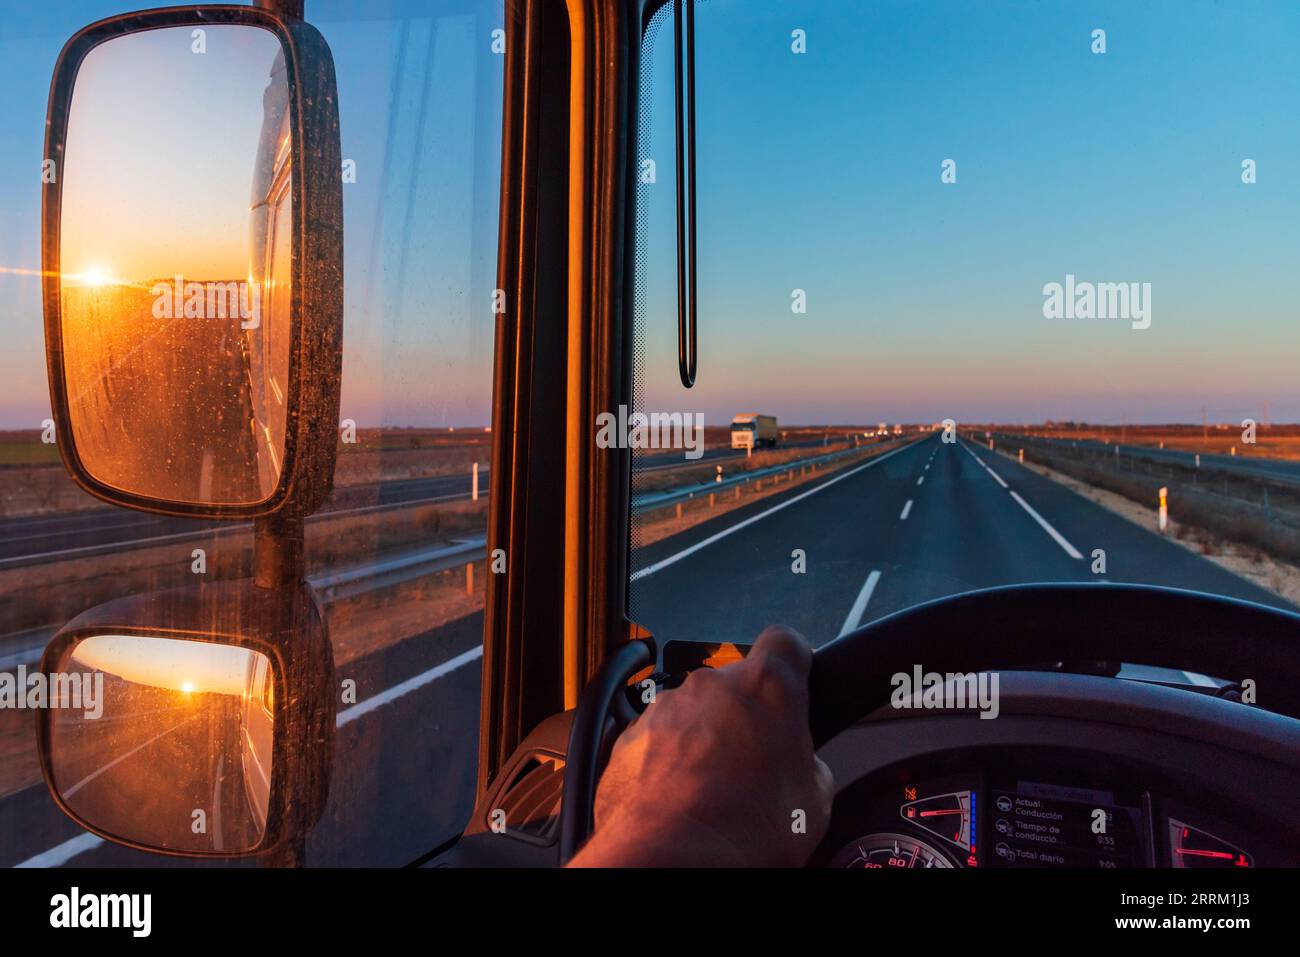 View from the driver's seat of a truck, with a straight road ahead and the sun rising. Stock Photo